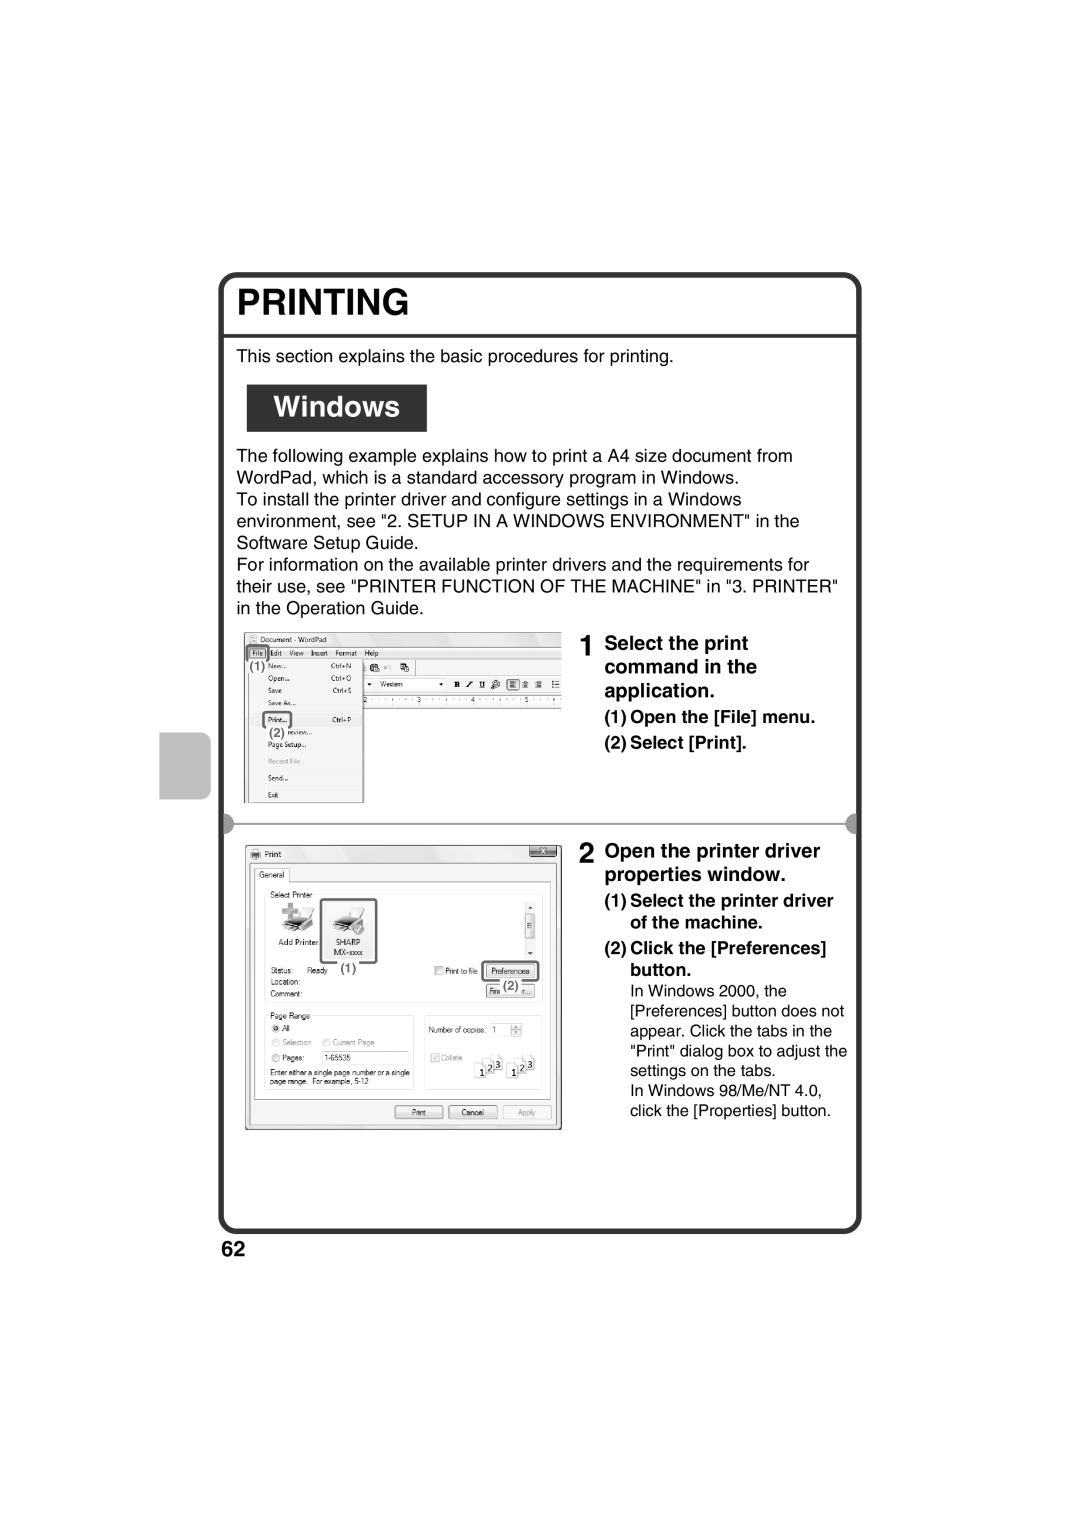 Sharp MX-C311 Printing, Windows, Select the print 1command in the application, Open the printer driver properties window 